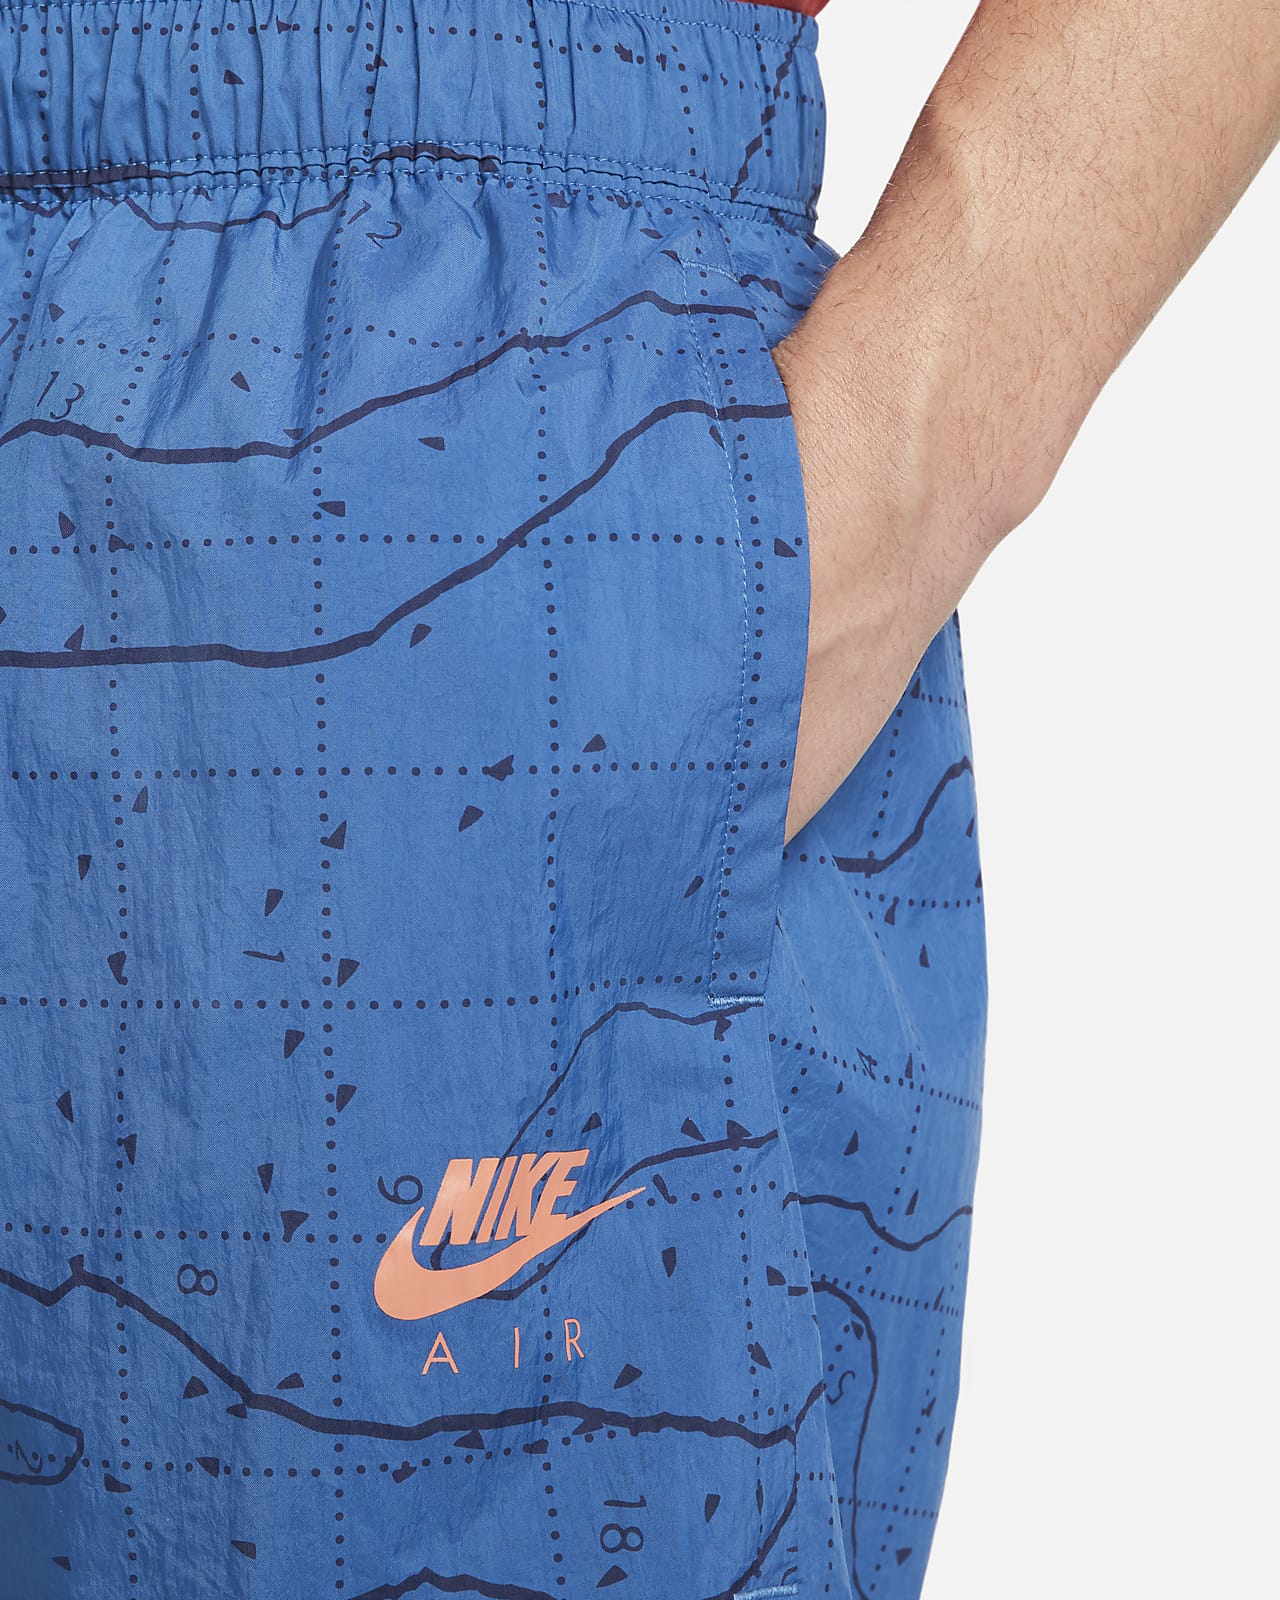 Nike Air Men's Lined Woven Shorts. Nike IL